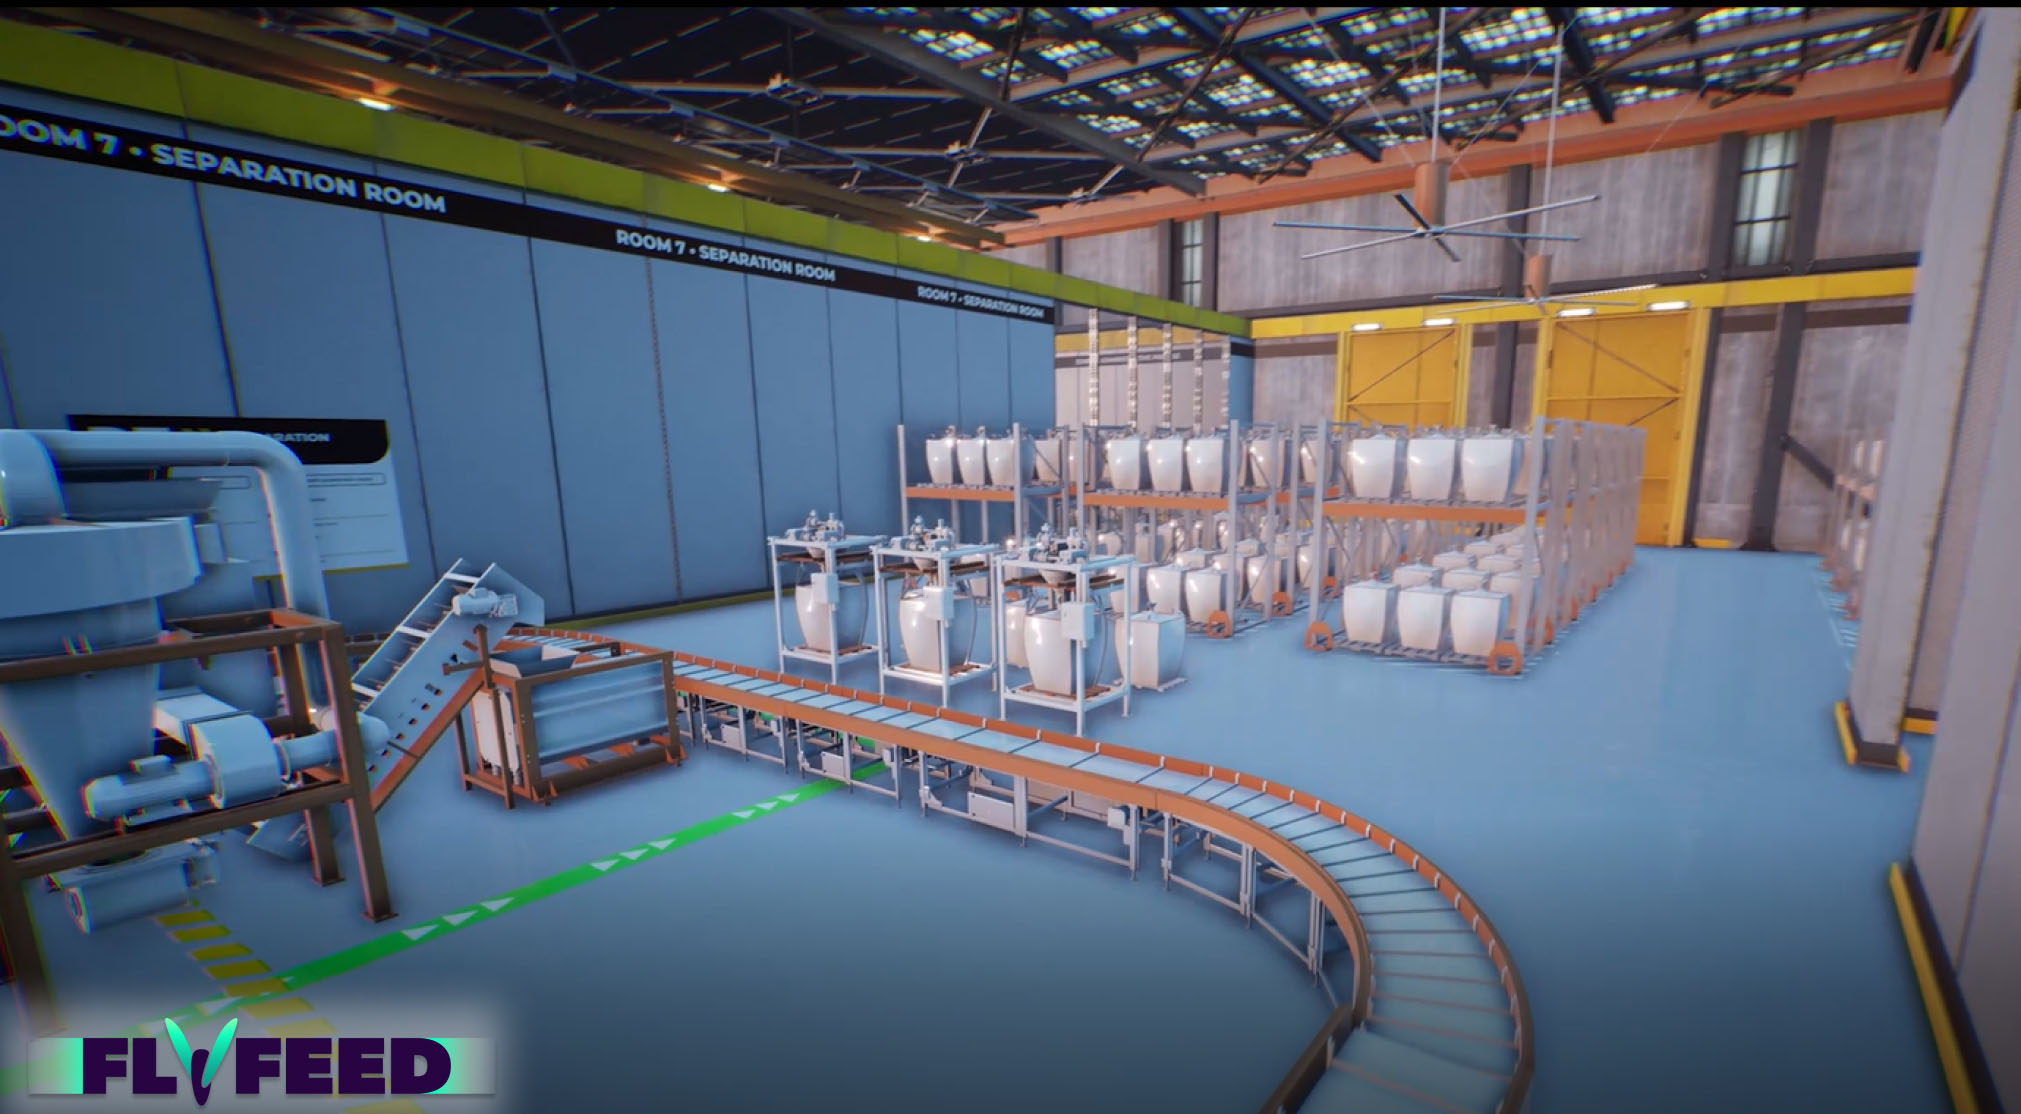 FlyFeed's production facility